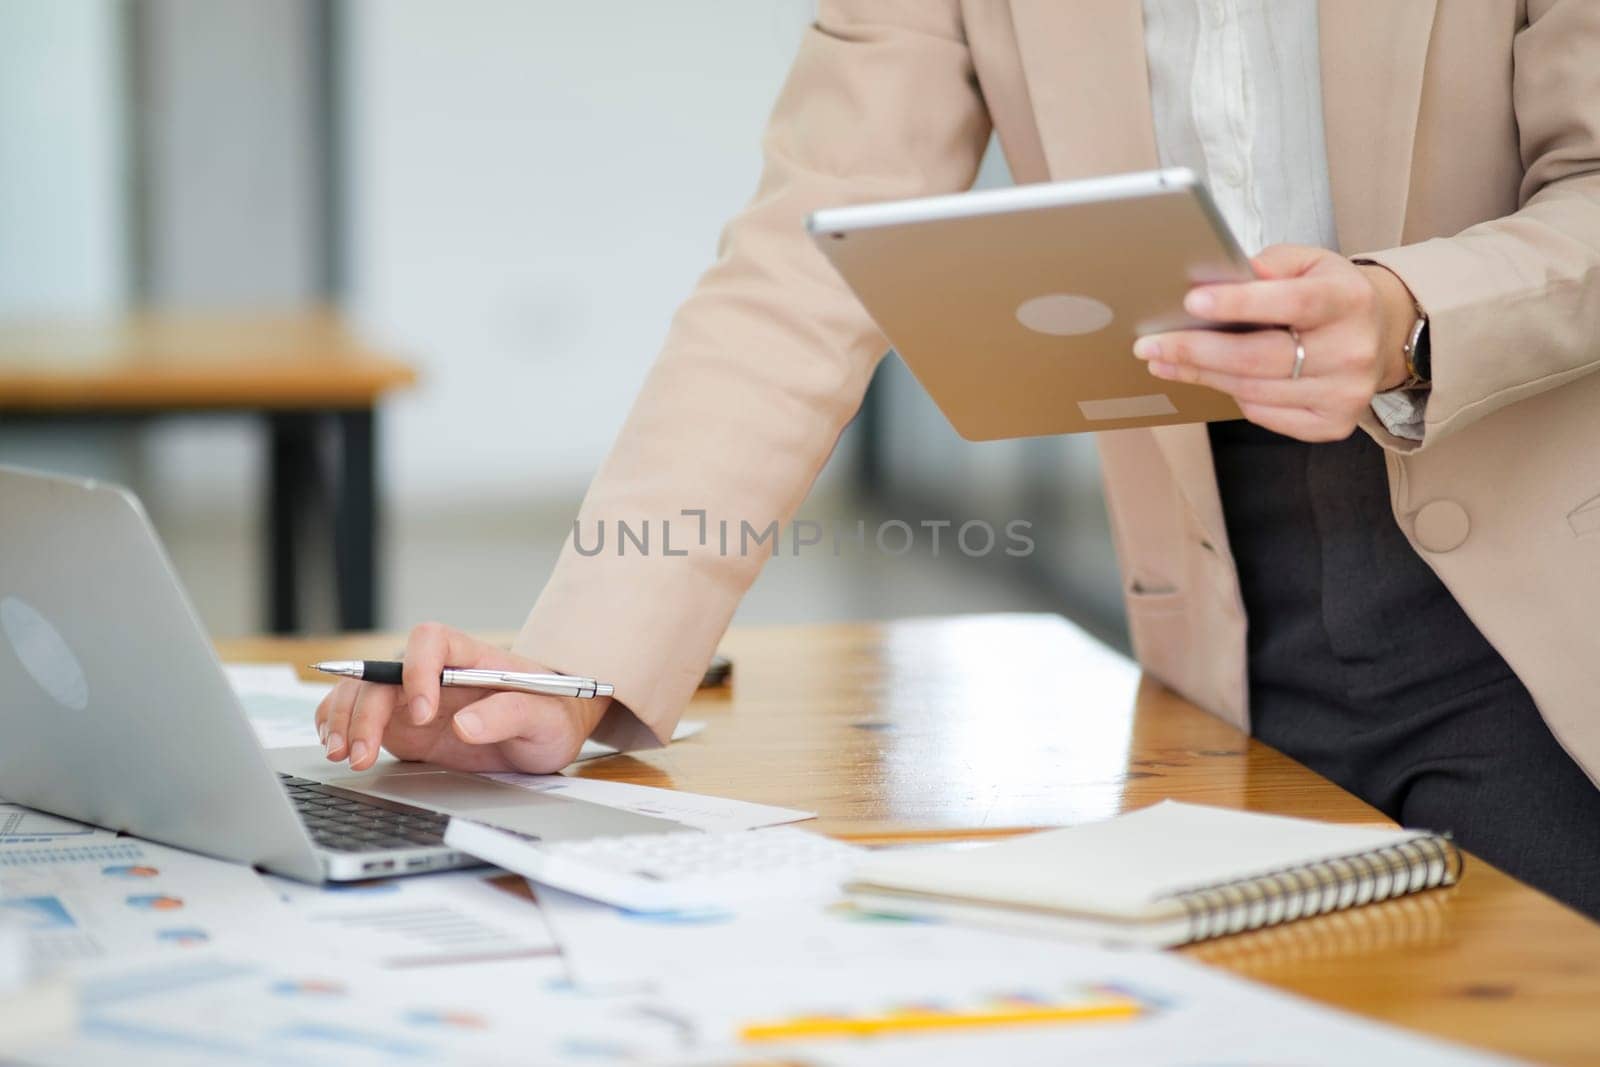 Close-up of a businesswoman hand as she meticulously analyzes data on her laptop, surrounded by business charts and a calculator..